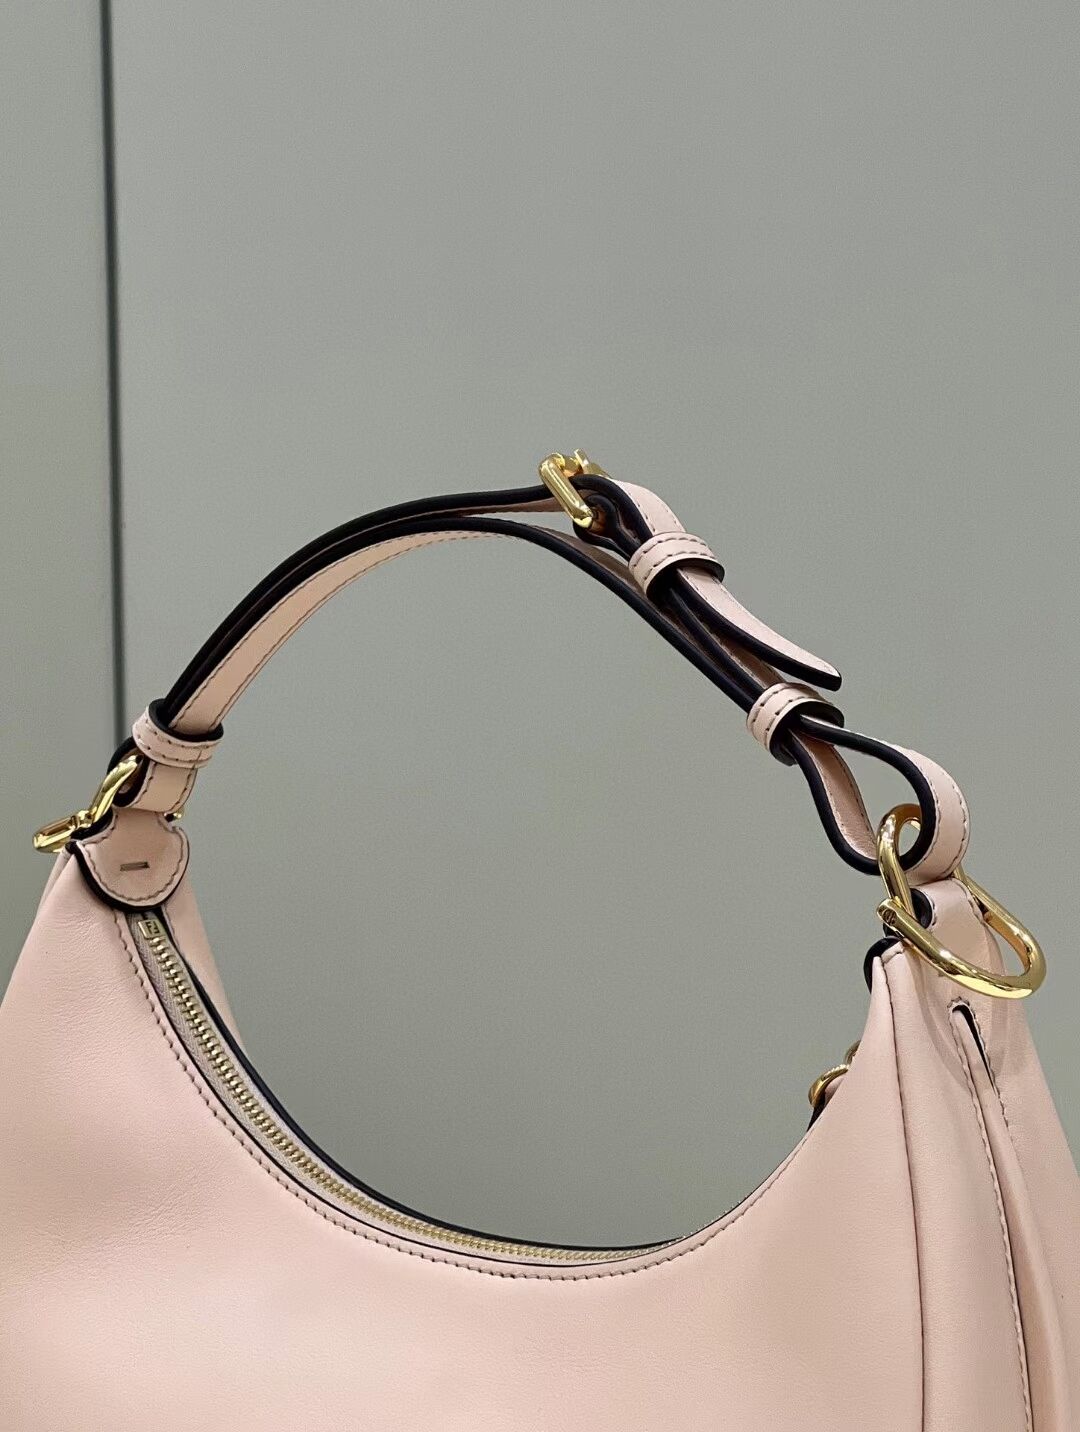 Fendi graphy Small Pale pink leather bag 8BR798